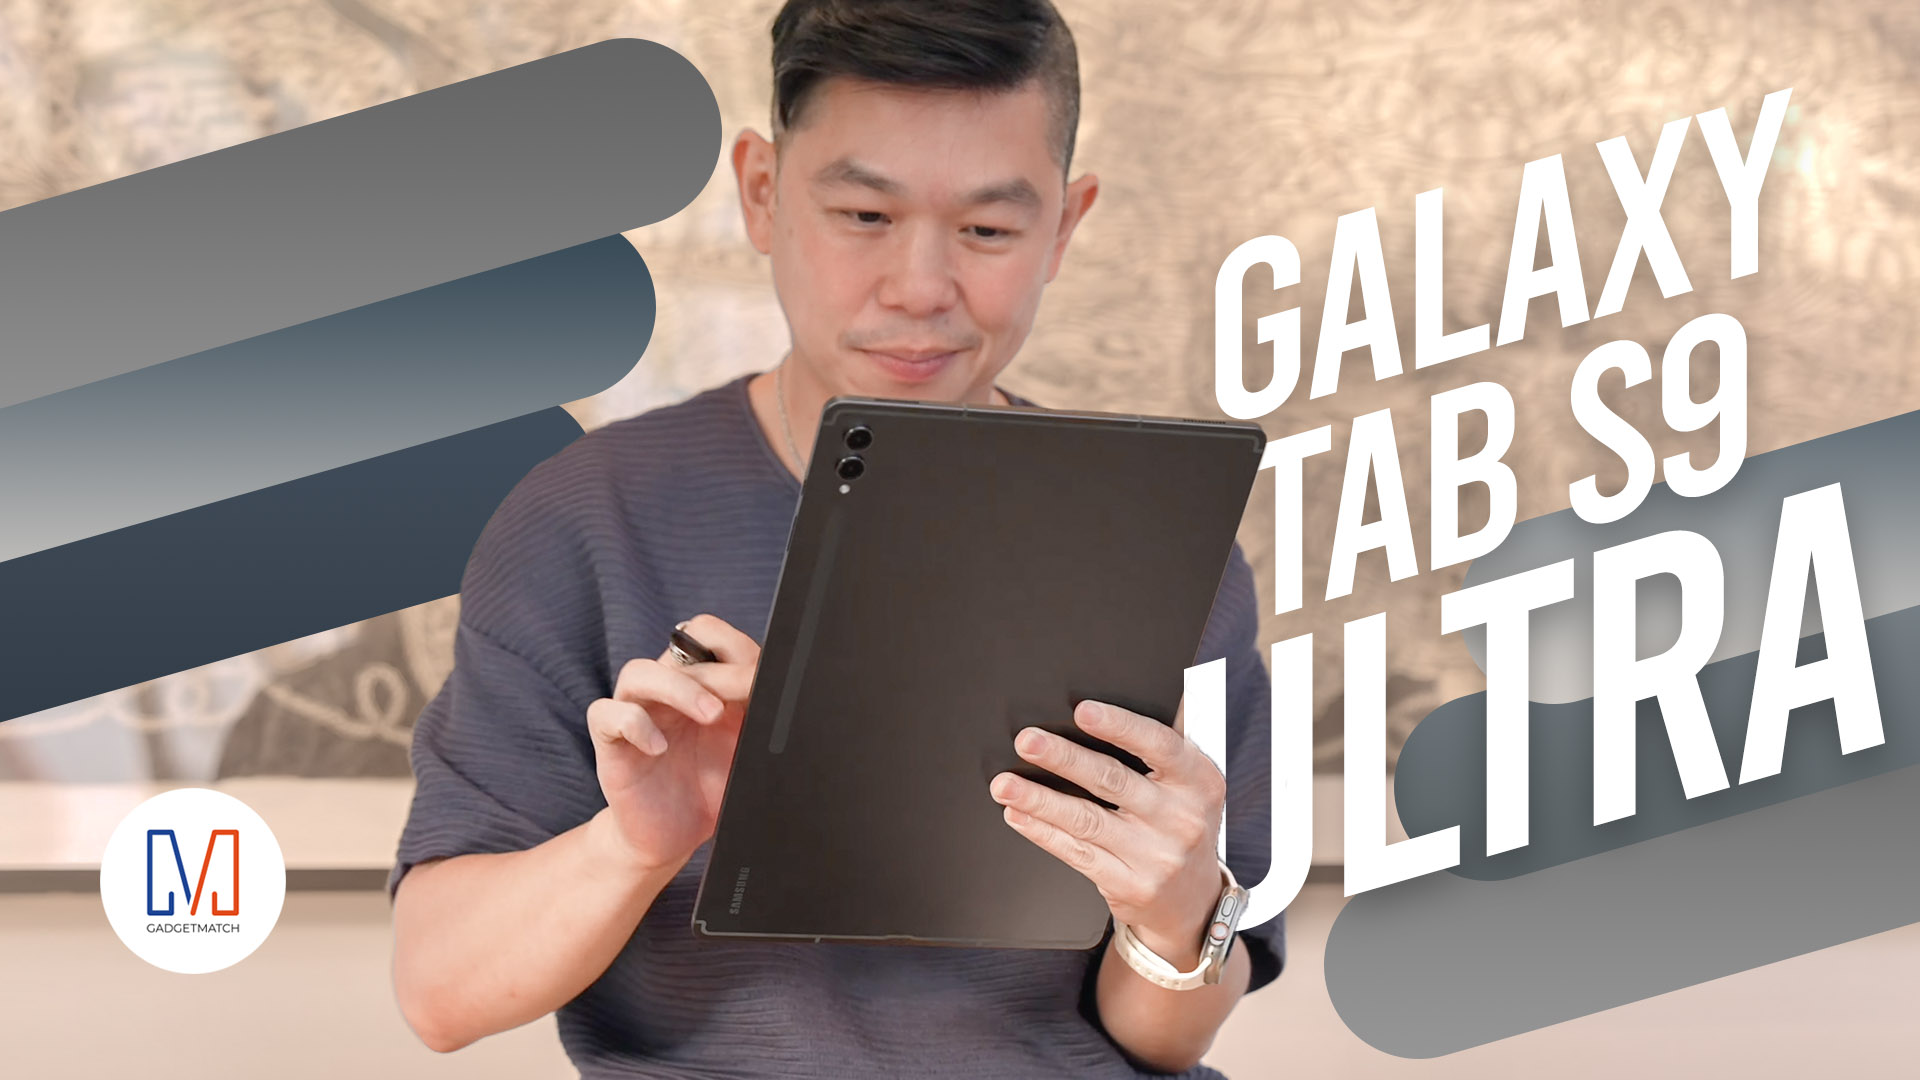 Samsung Galaxy Tab S9 Ultra hands-on: A premium tablet with water